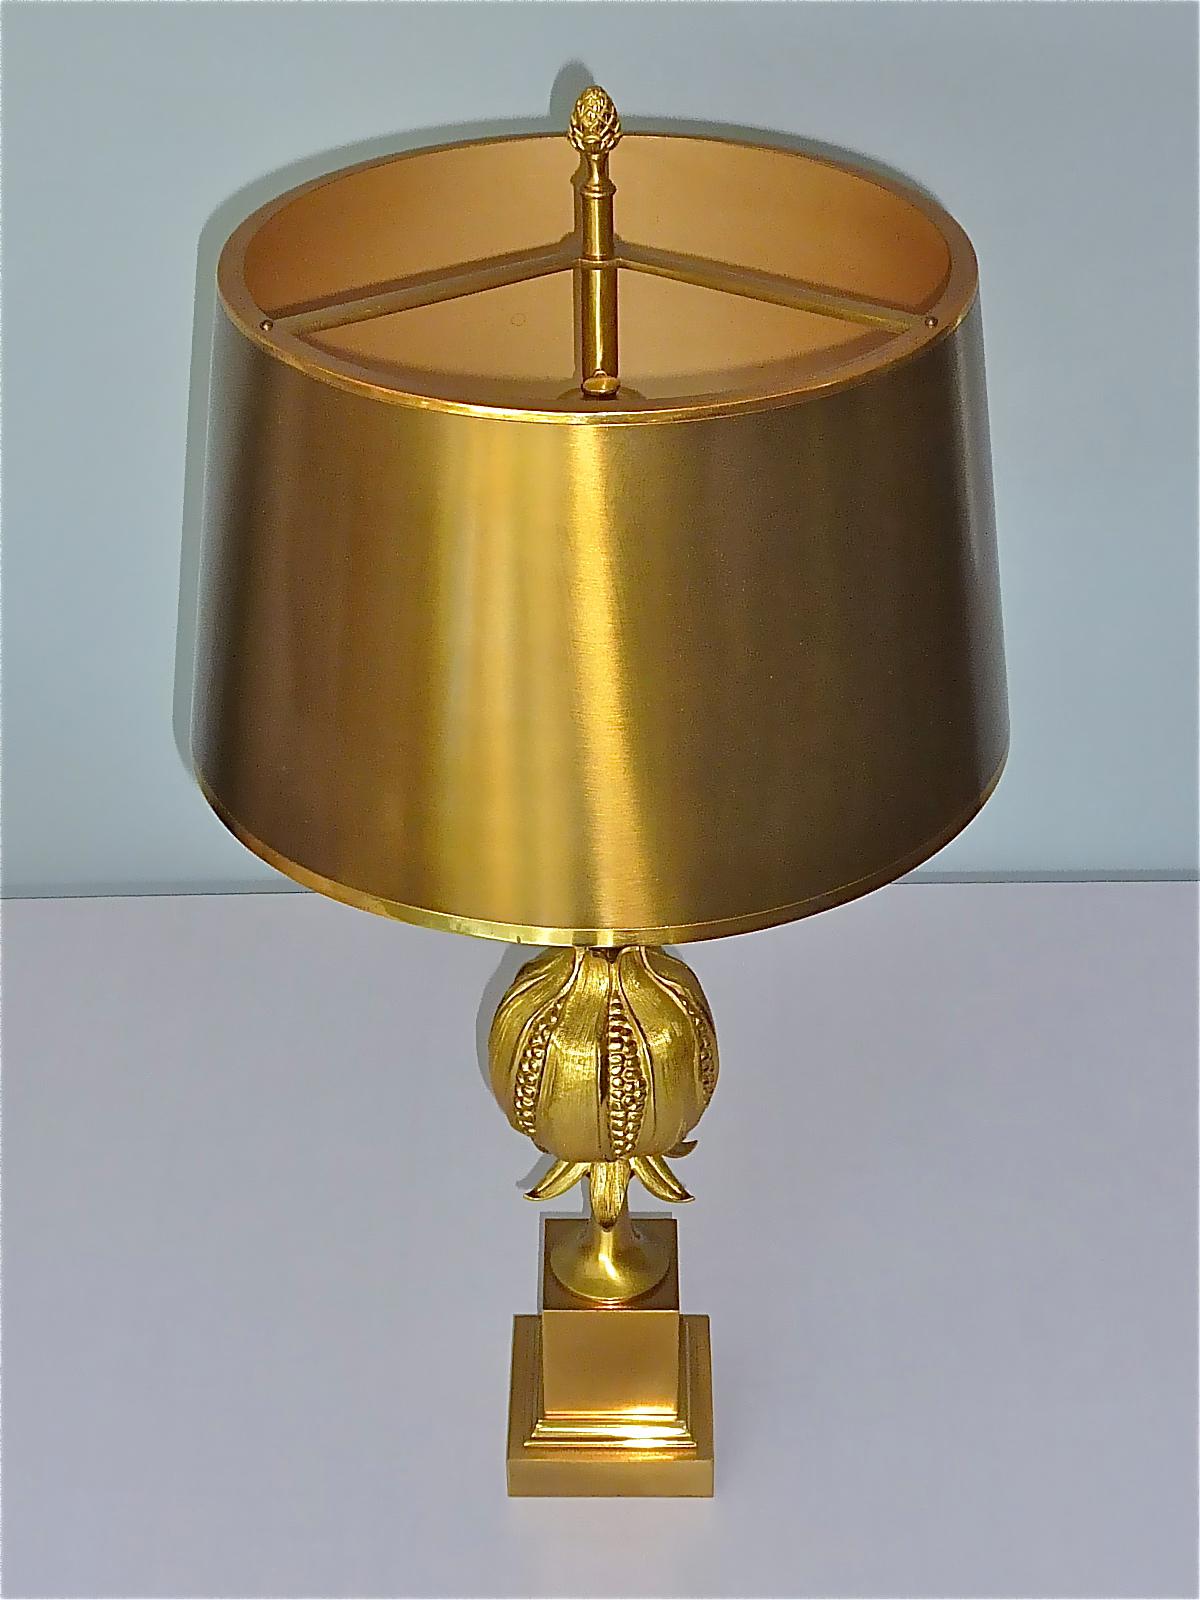 Rare Signed Gilt Bronze French Table Lamp Maison Charles Pomgranate 1970s Jansen For Sale 1